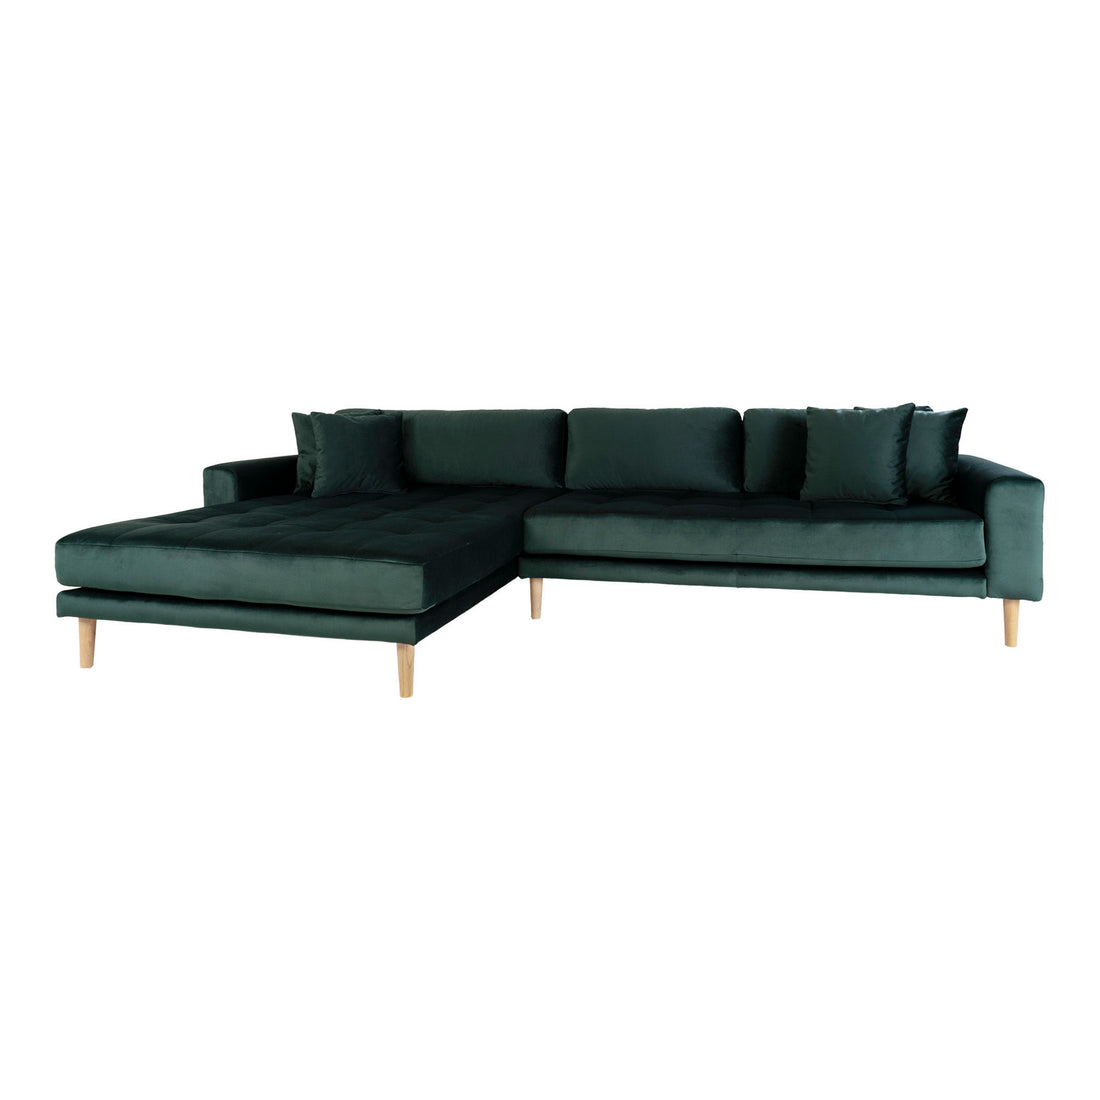 Lido Lounge Sofa - Lounge Sofa, Left in Velor, Dark Green with Four Pillows and Nature Wooden Ben, HN1006 - 1 - Pcs